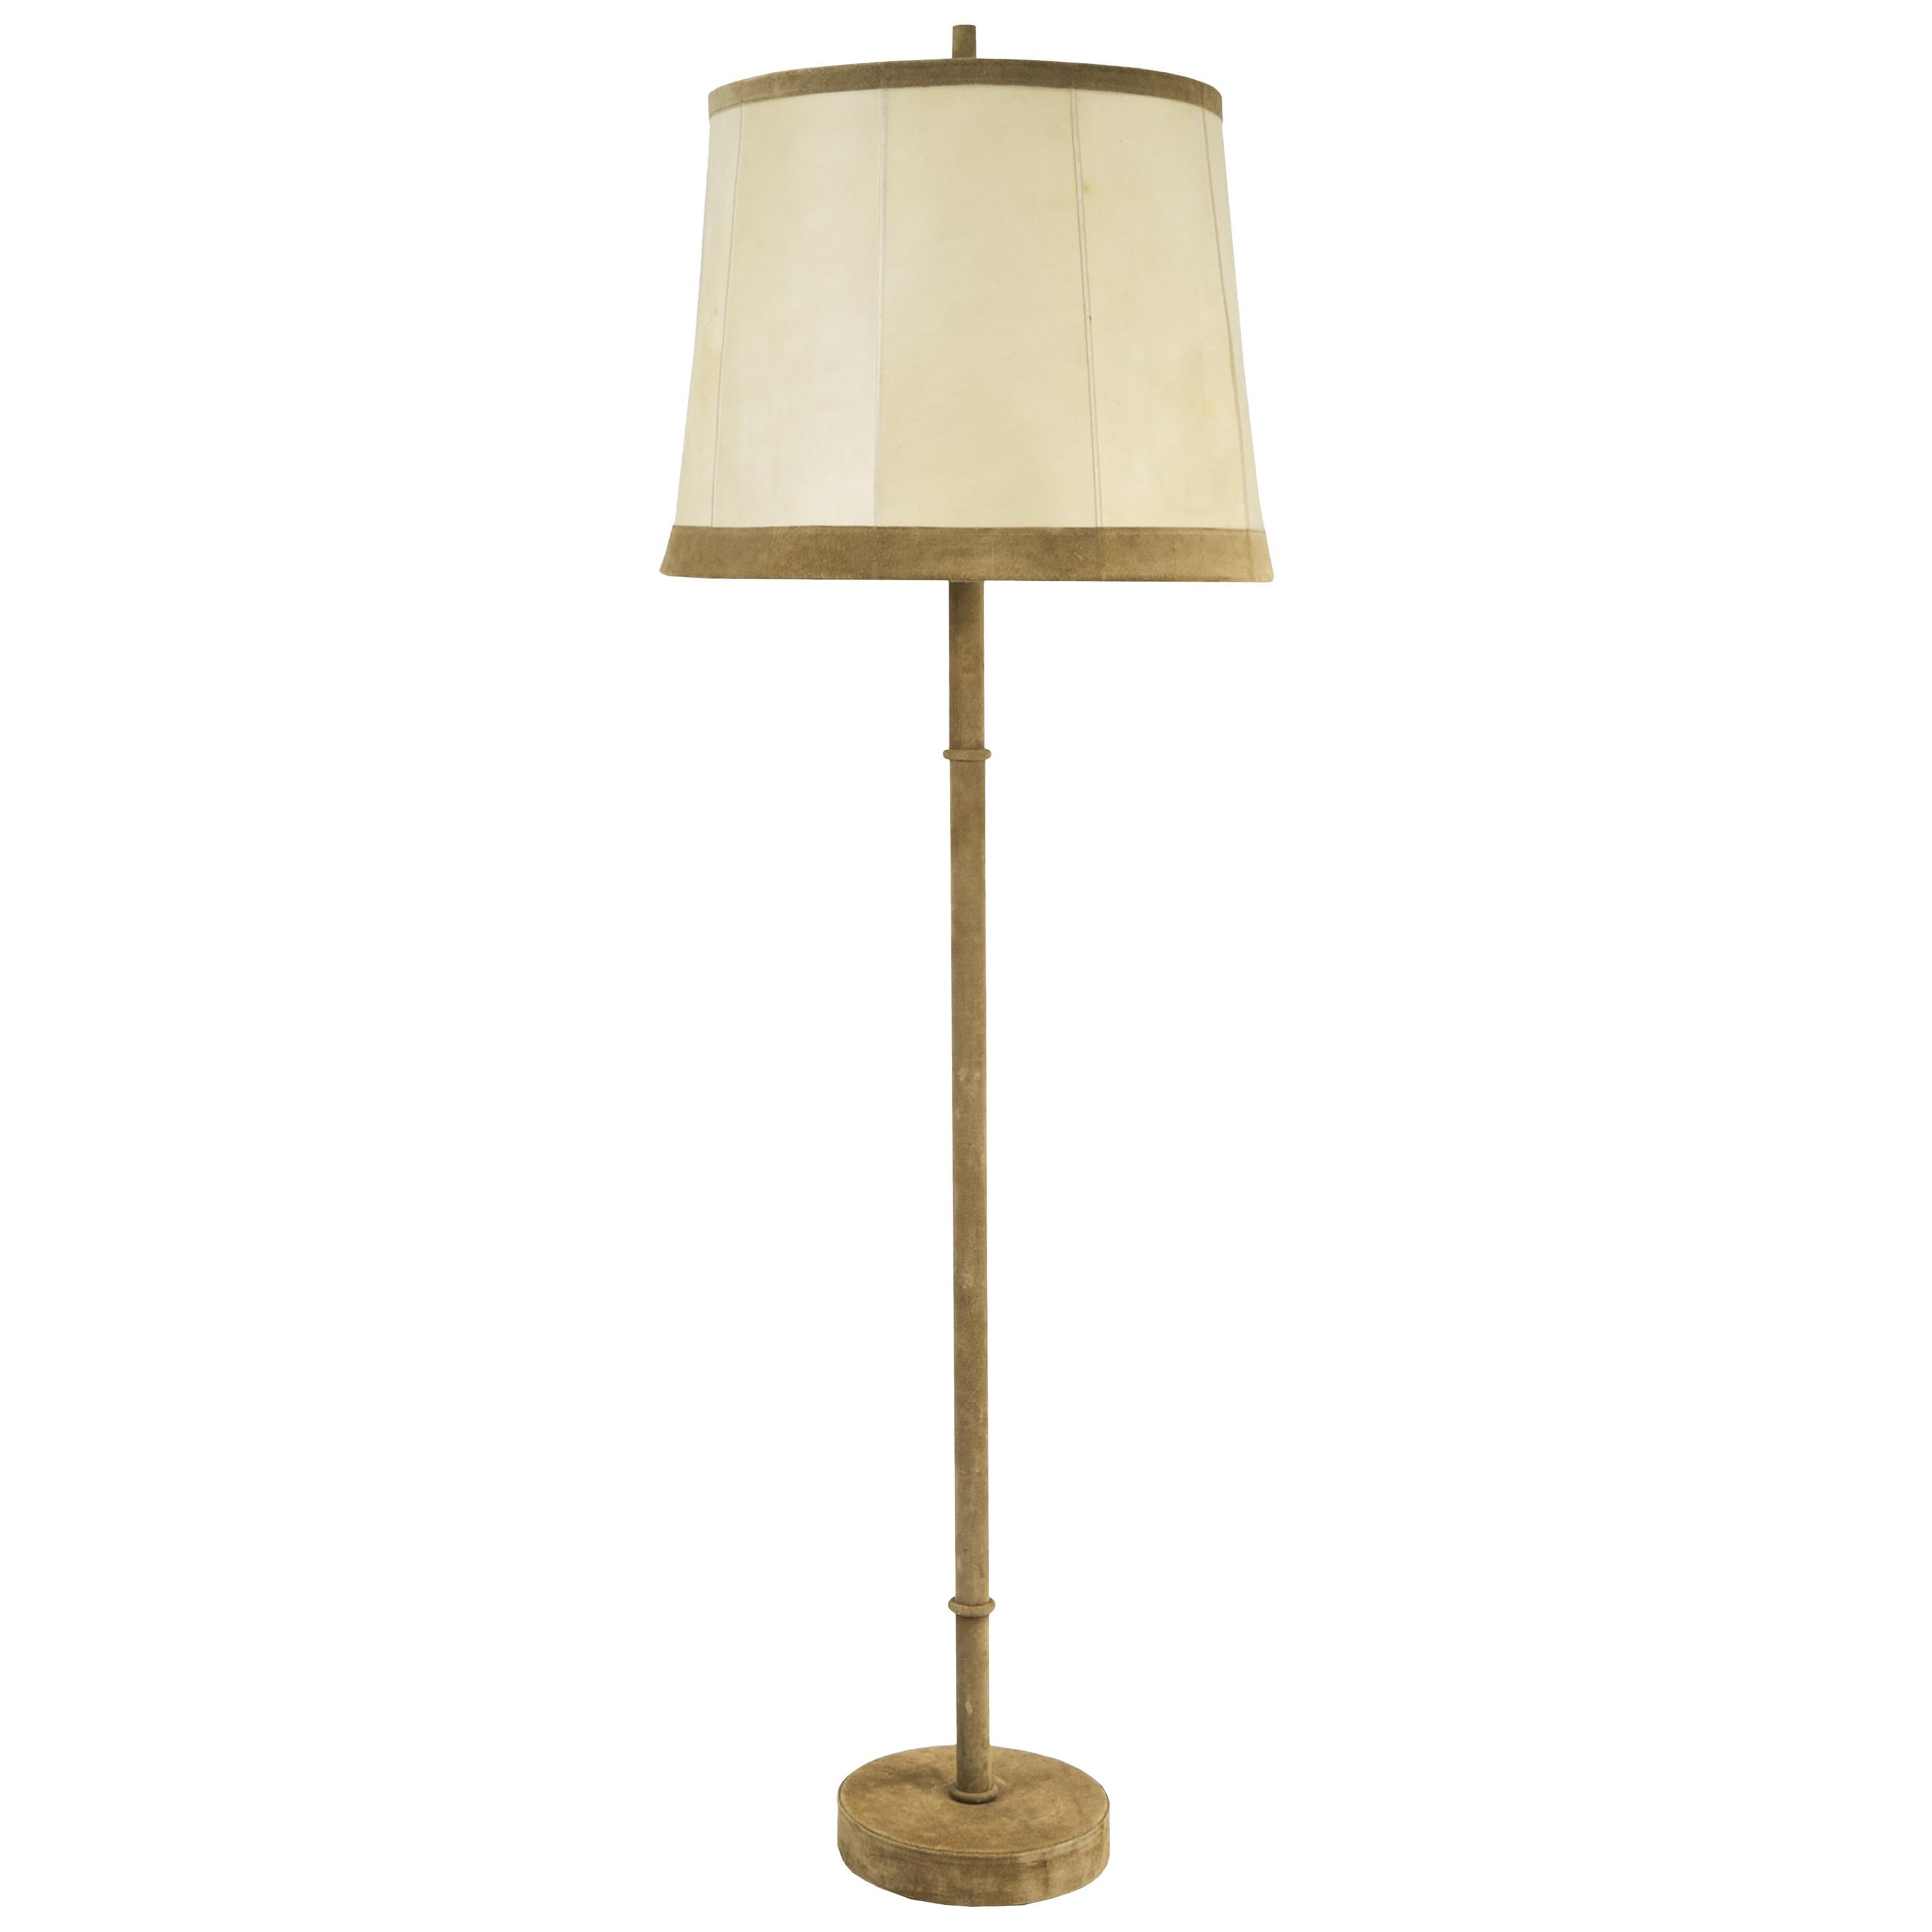 1960s Suede Floor Lamp with Goatskin Shade